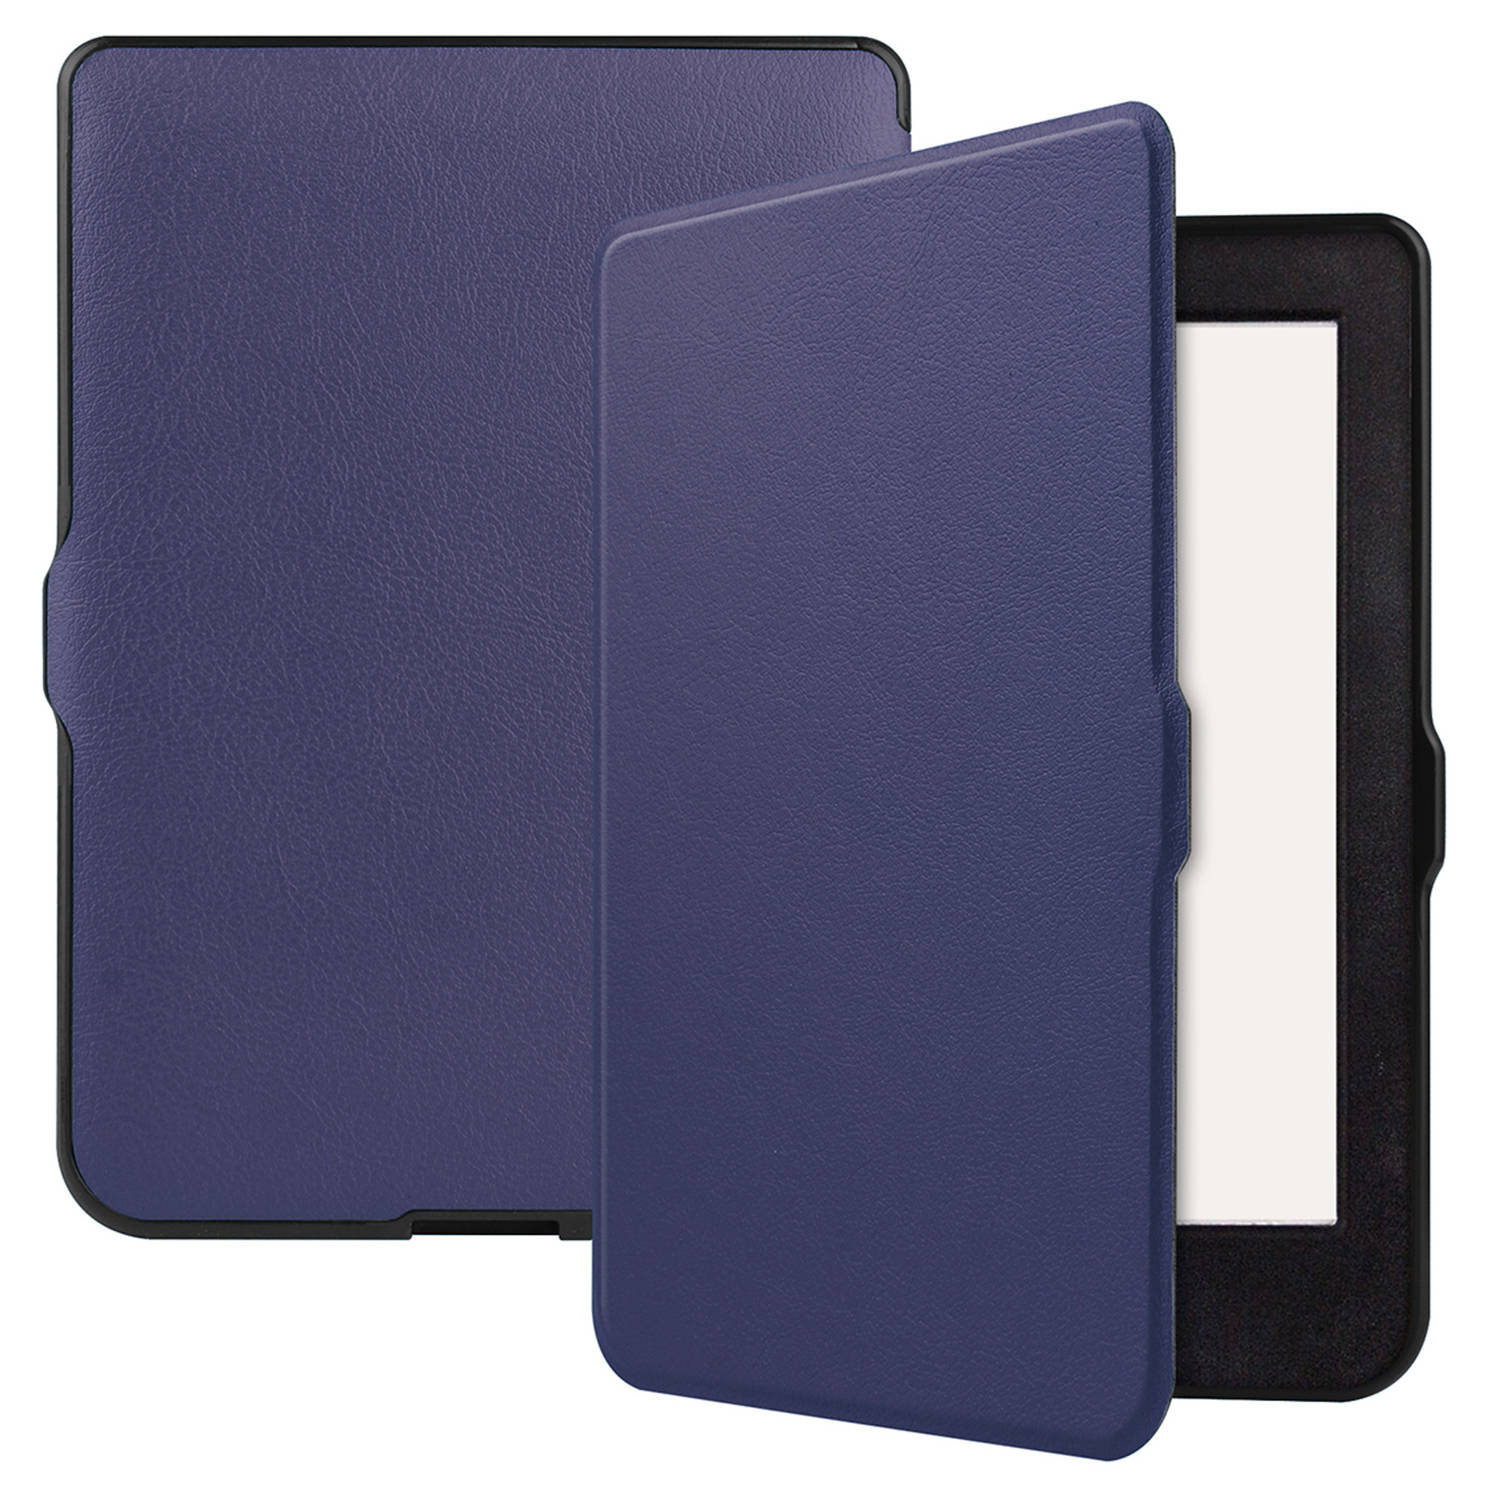 Basey Kobo Nia Hoesje Bookcase Cover Hoes - Kobo Nia Case Cover Hoes - Donker Blauw